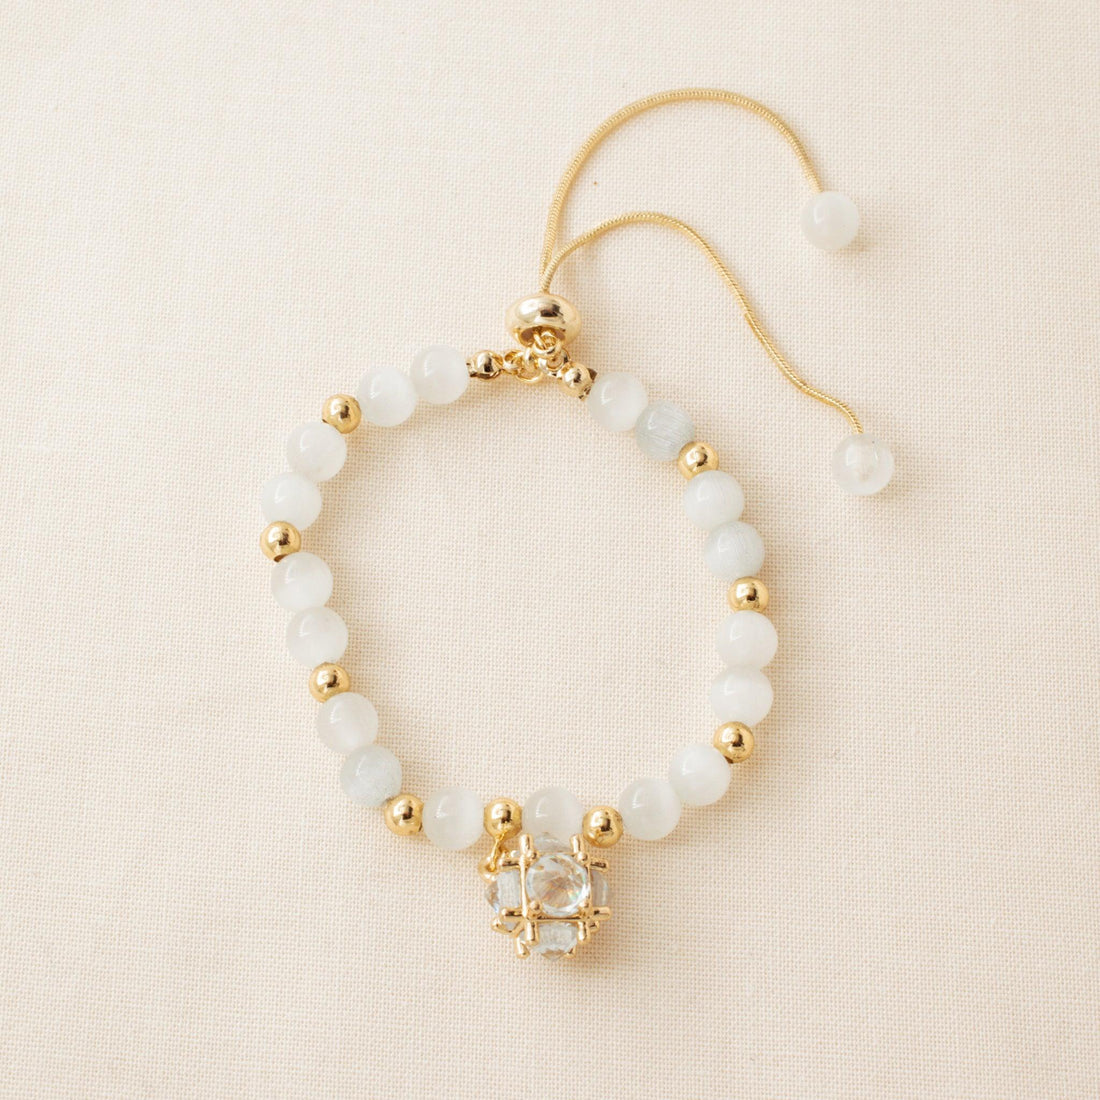 Opal Charm Bracelet with opal and gold-plated beads